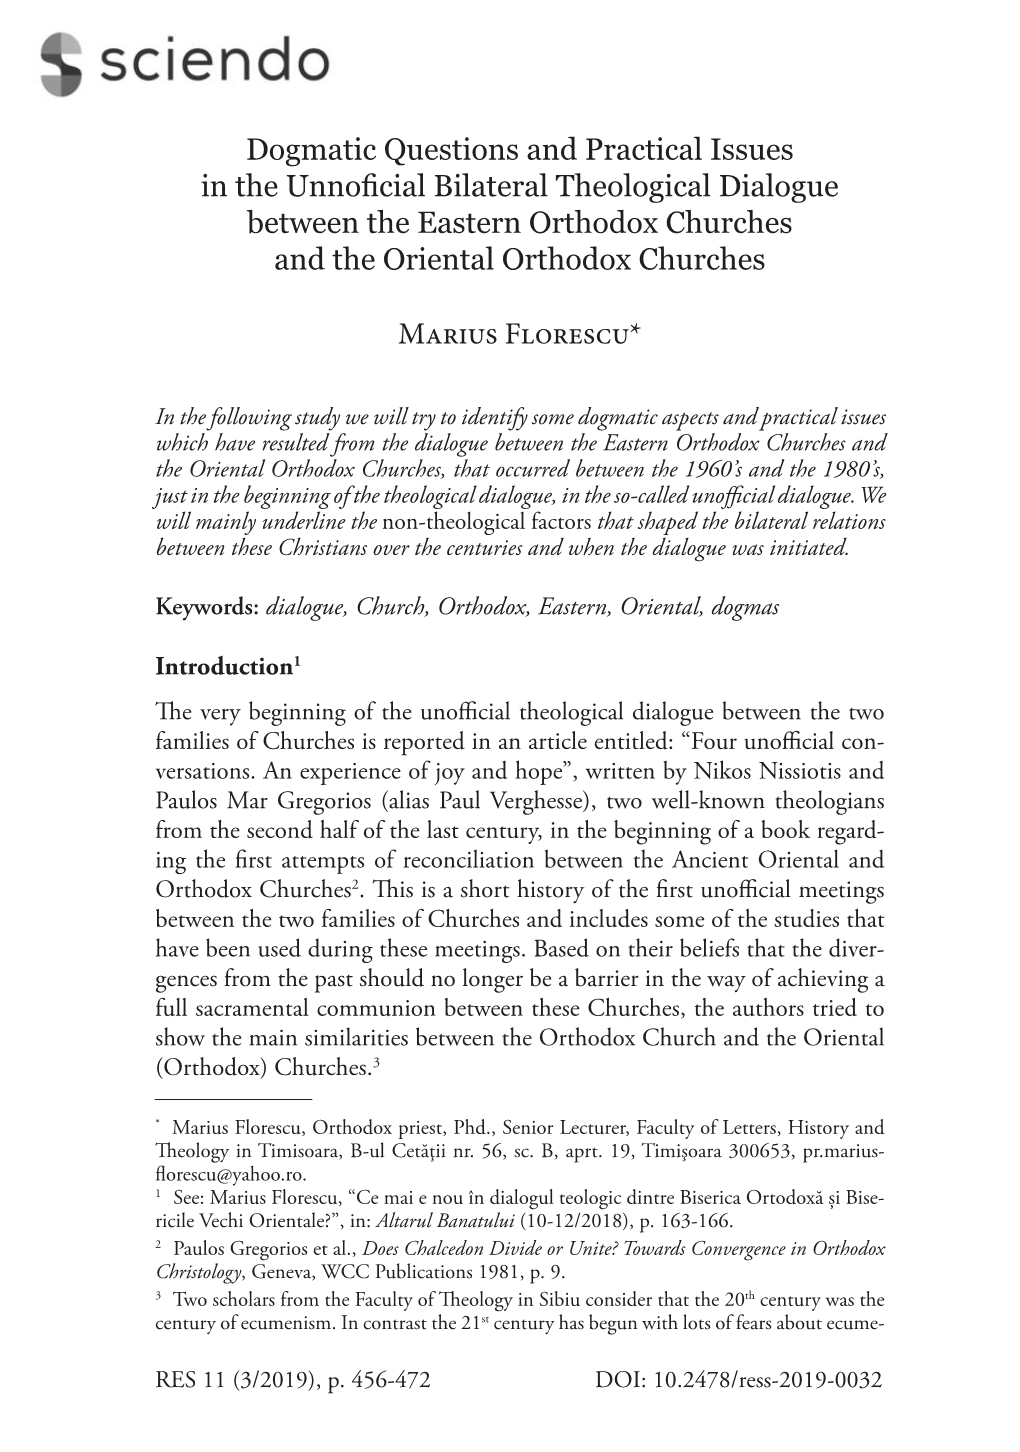 Dogmatic Questions and Practical Issues in the Unnoficial Bilateral Theological Dialogue Between the Eastern Orthodox Churches and the Oriental Orthodox Churches